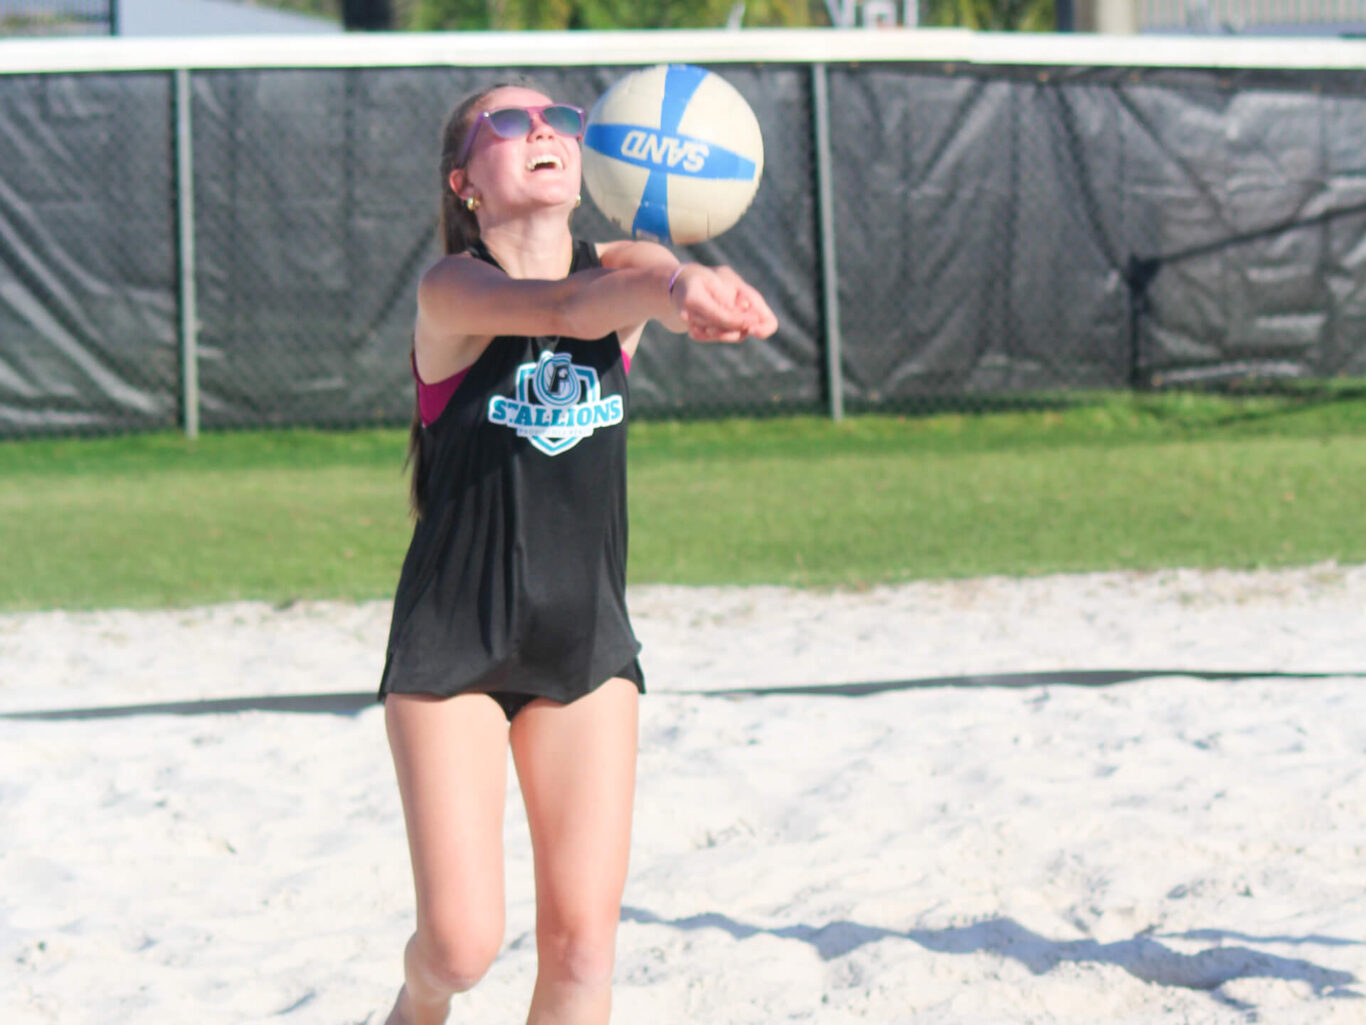 A girl is playing beach volleyball.